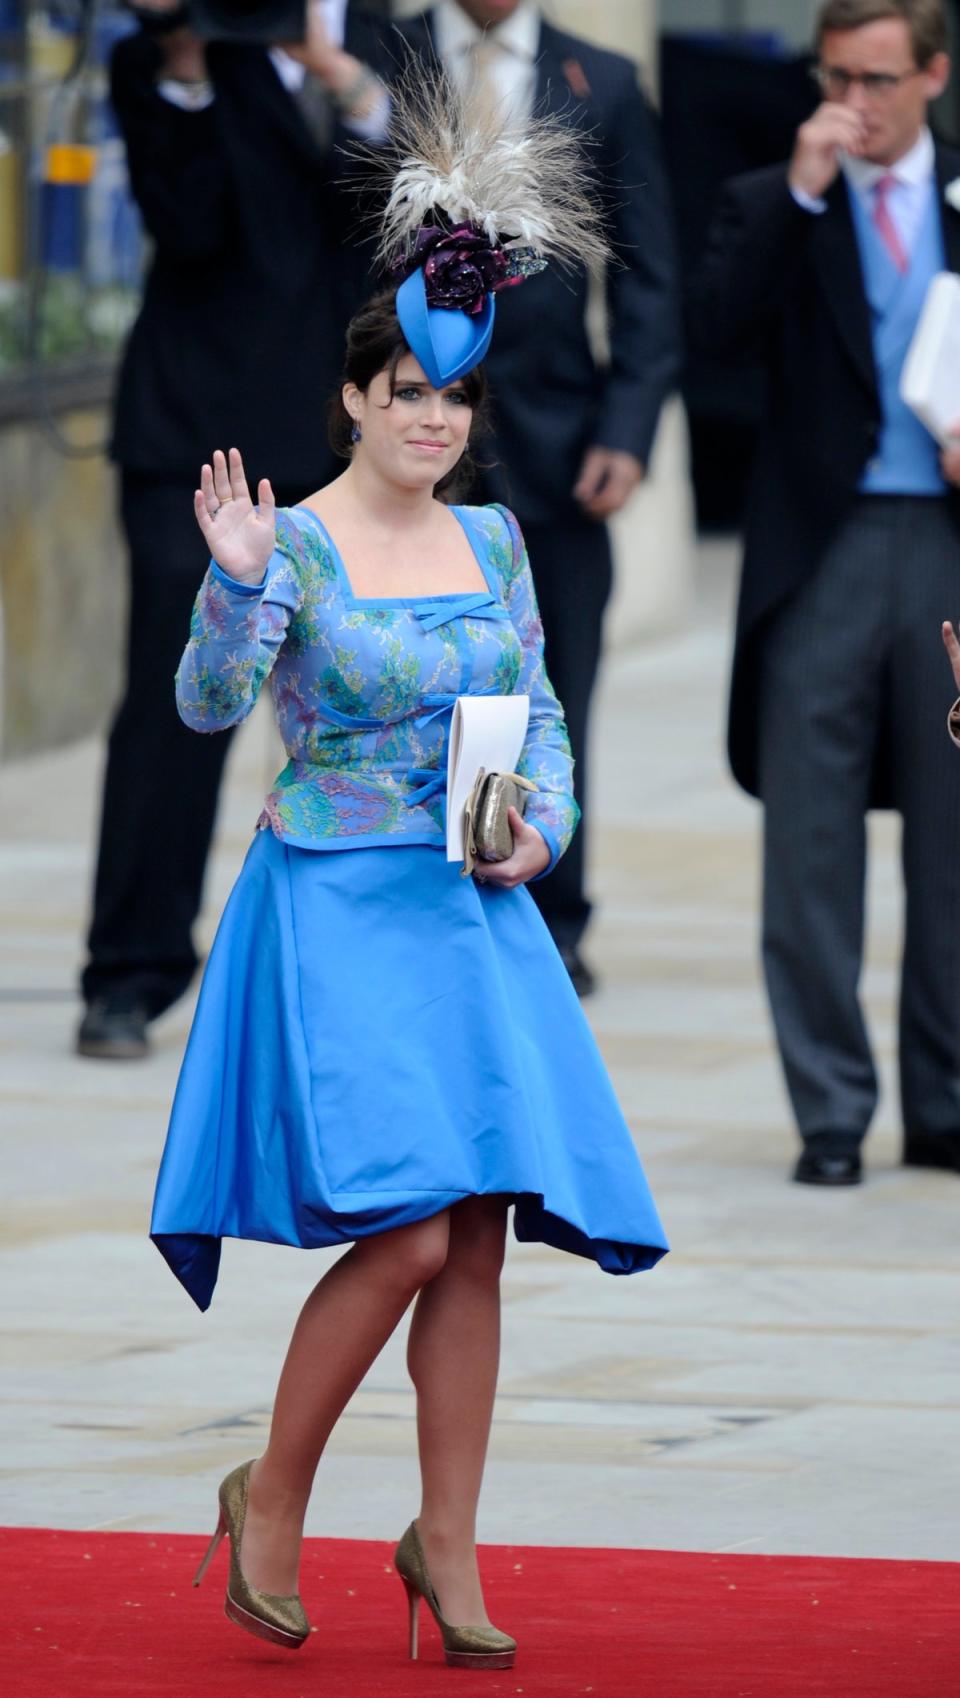 Princess Eugenie waves as she leaves Westminster Abbey in London after the wedding of Prince William and Kate in 2011 (AFP via Getty Images)